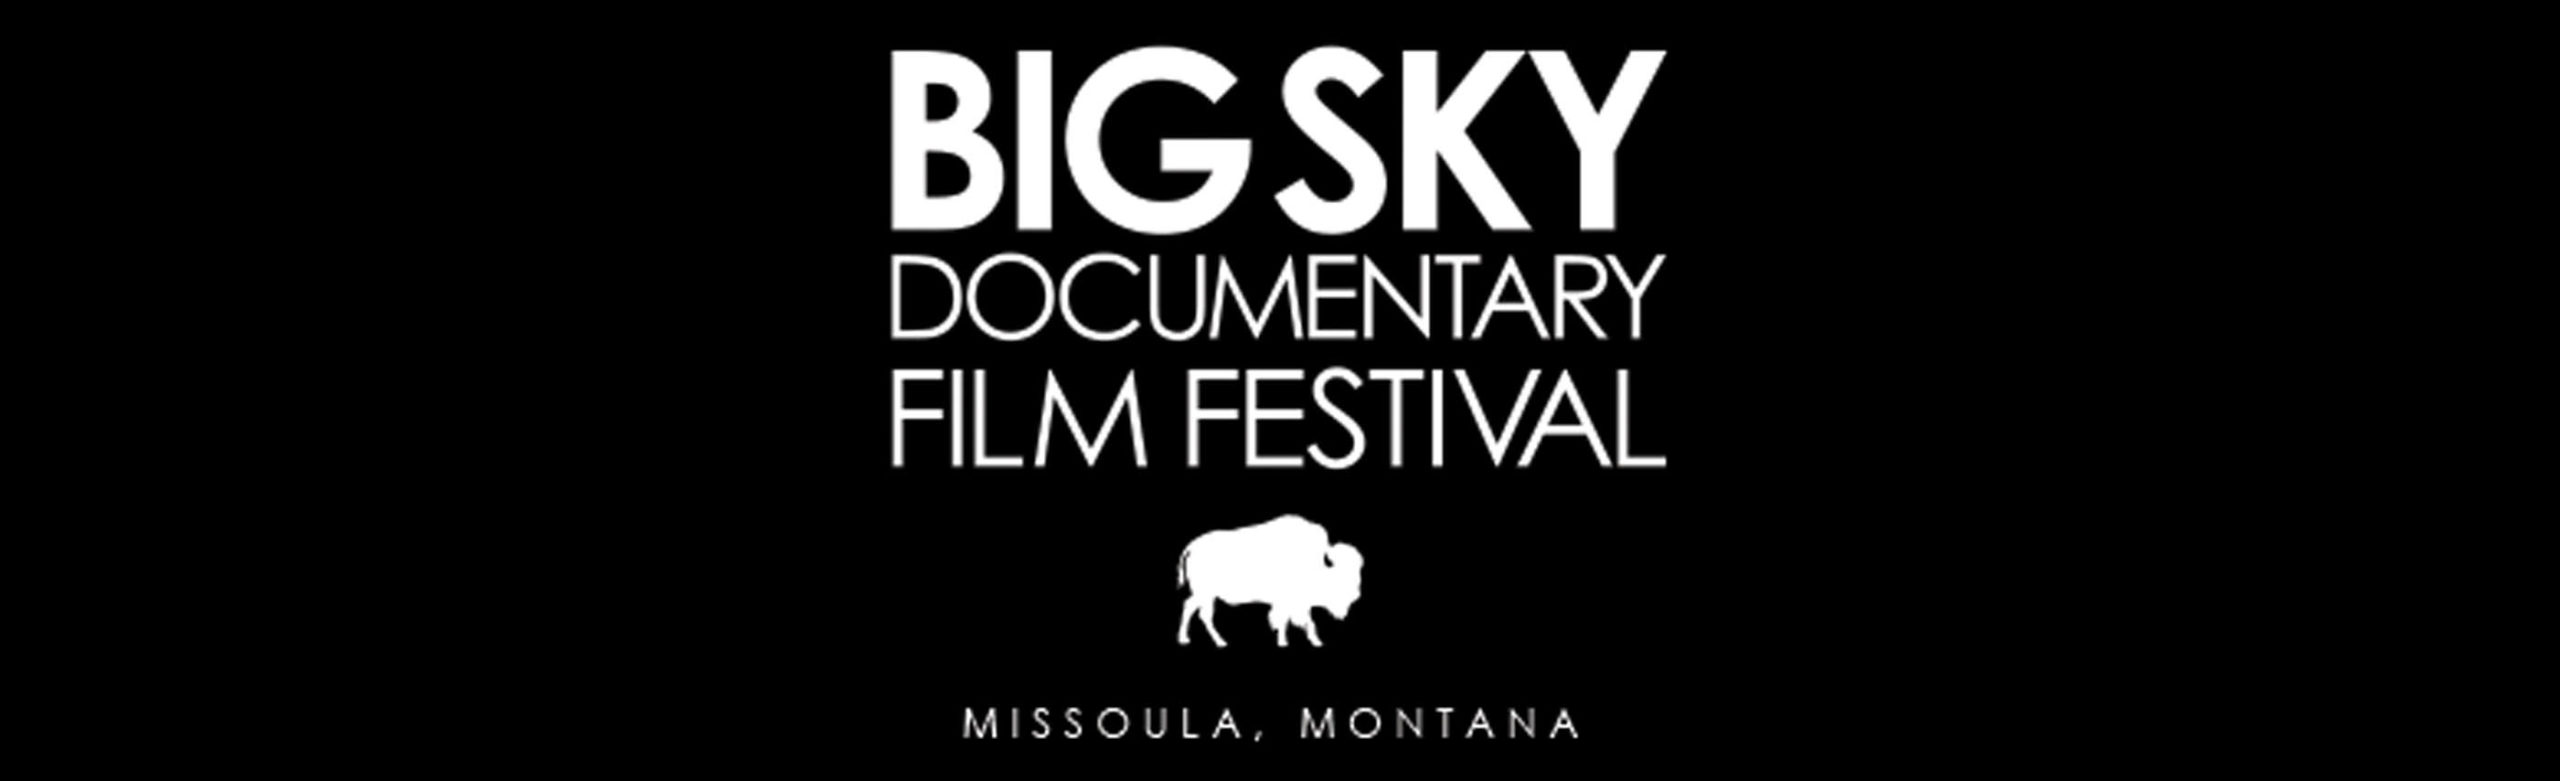 The 2018 Big Sky Documentary Film Festival Returns to The Wilma Image